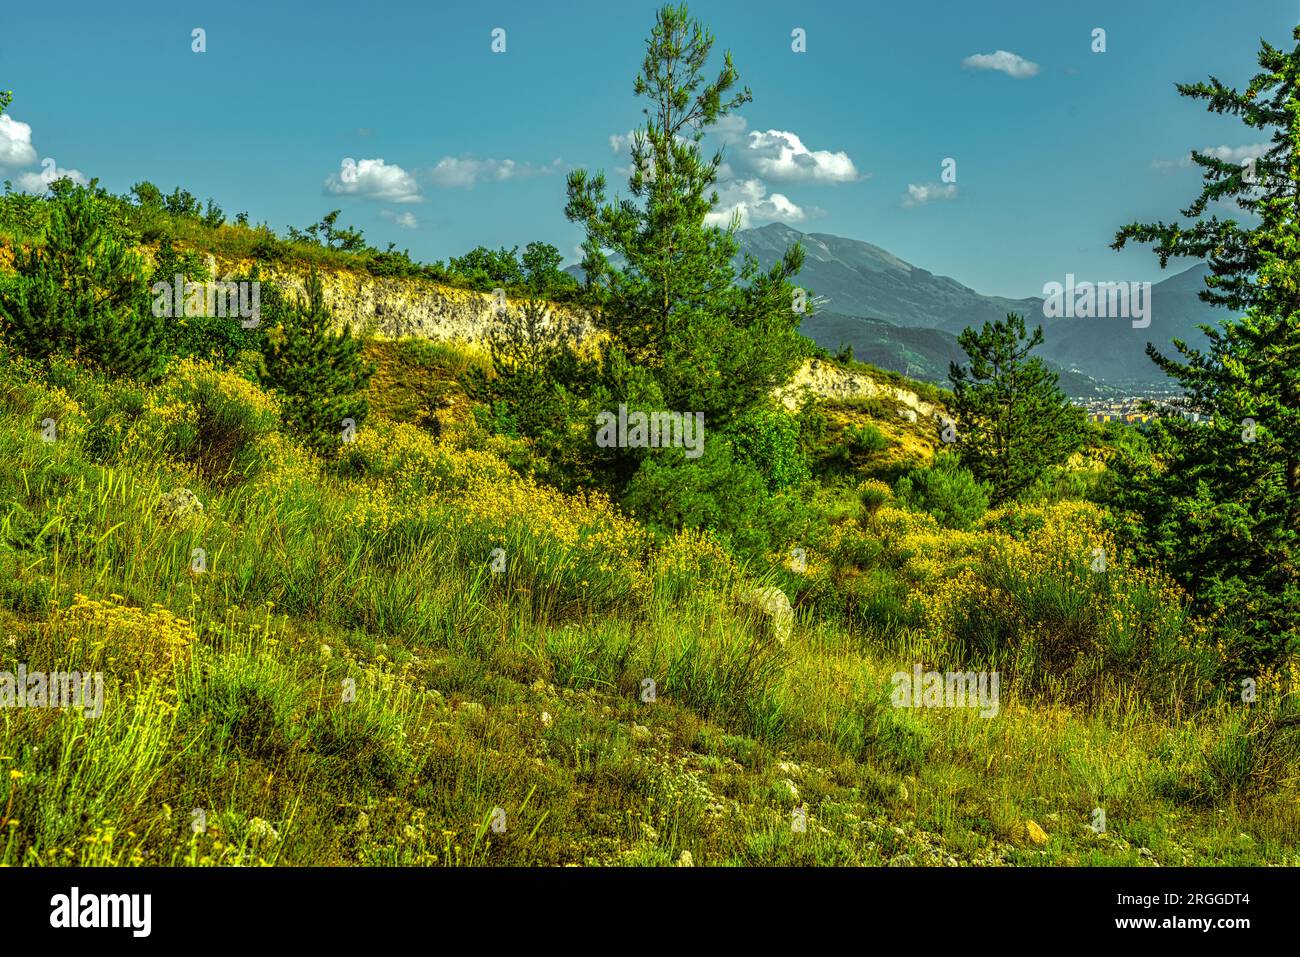 Meadows and blooms of Ginestra Odorosa or Spanish broom, Spartium junceum, on the slopes of Monte Morrone. Maiella National Park, Abruzzo, Italy Stock Photo